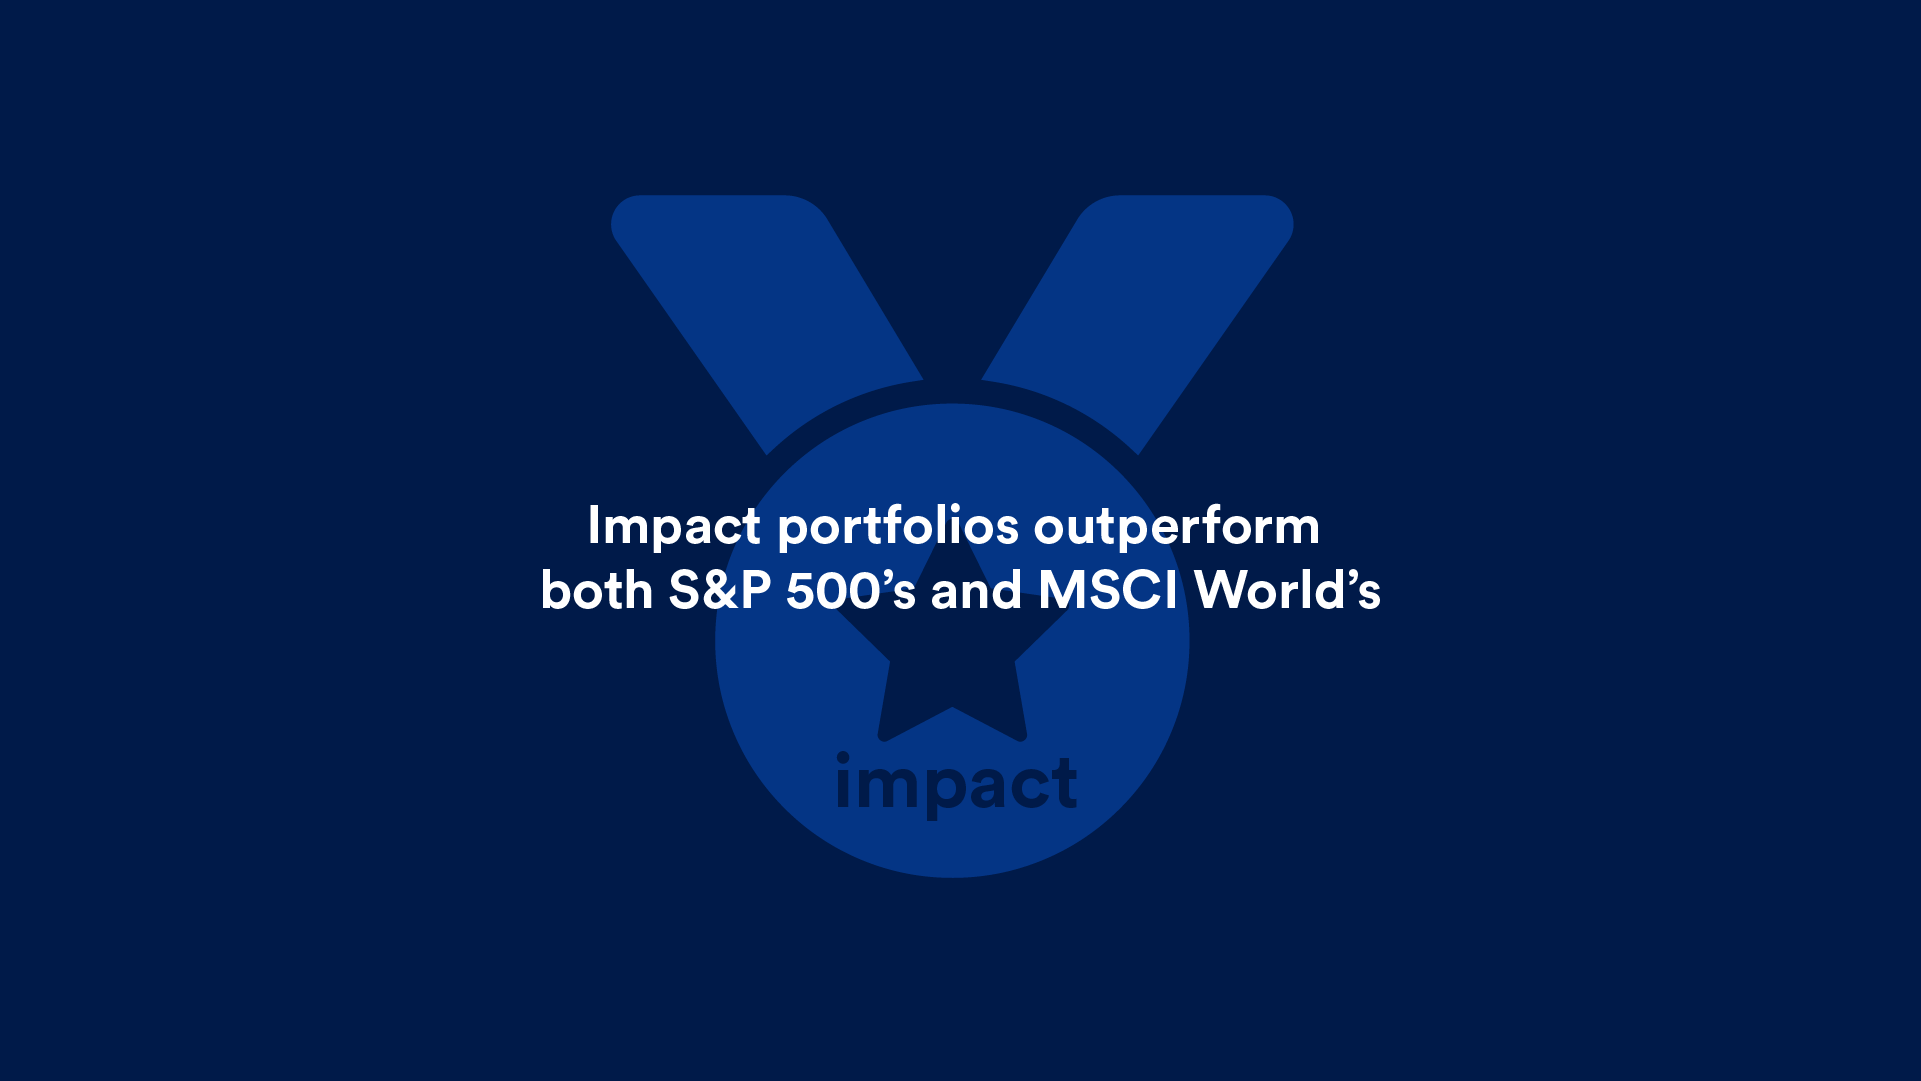 Impact portfolios outperform both S&P 500’s and MSCI World’s